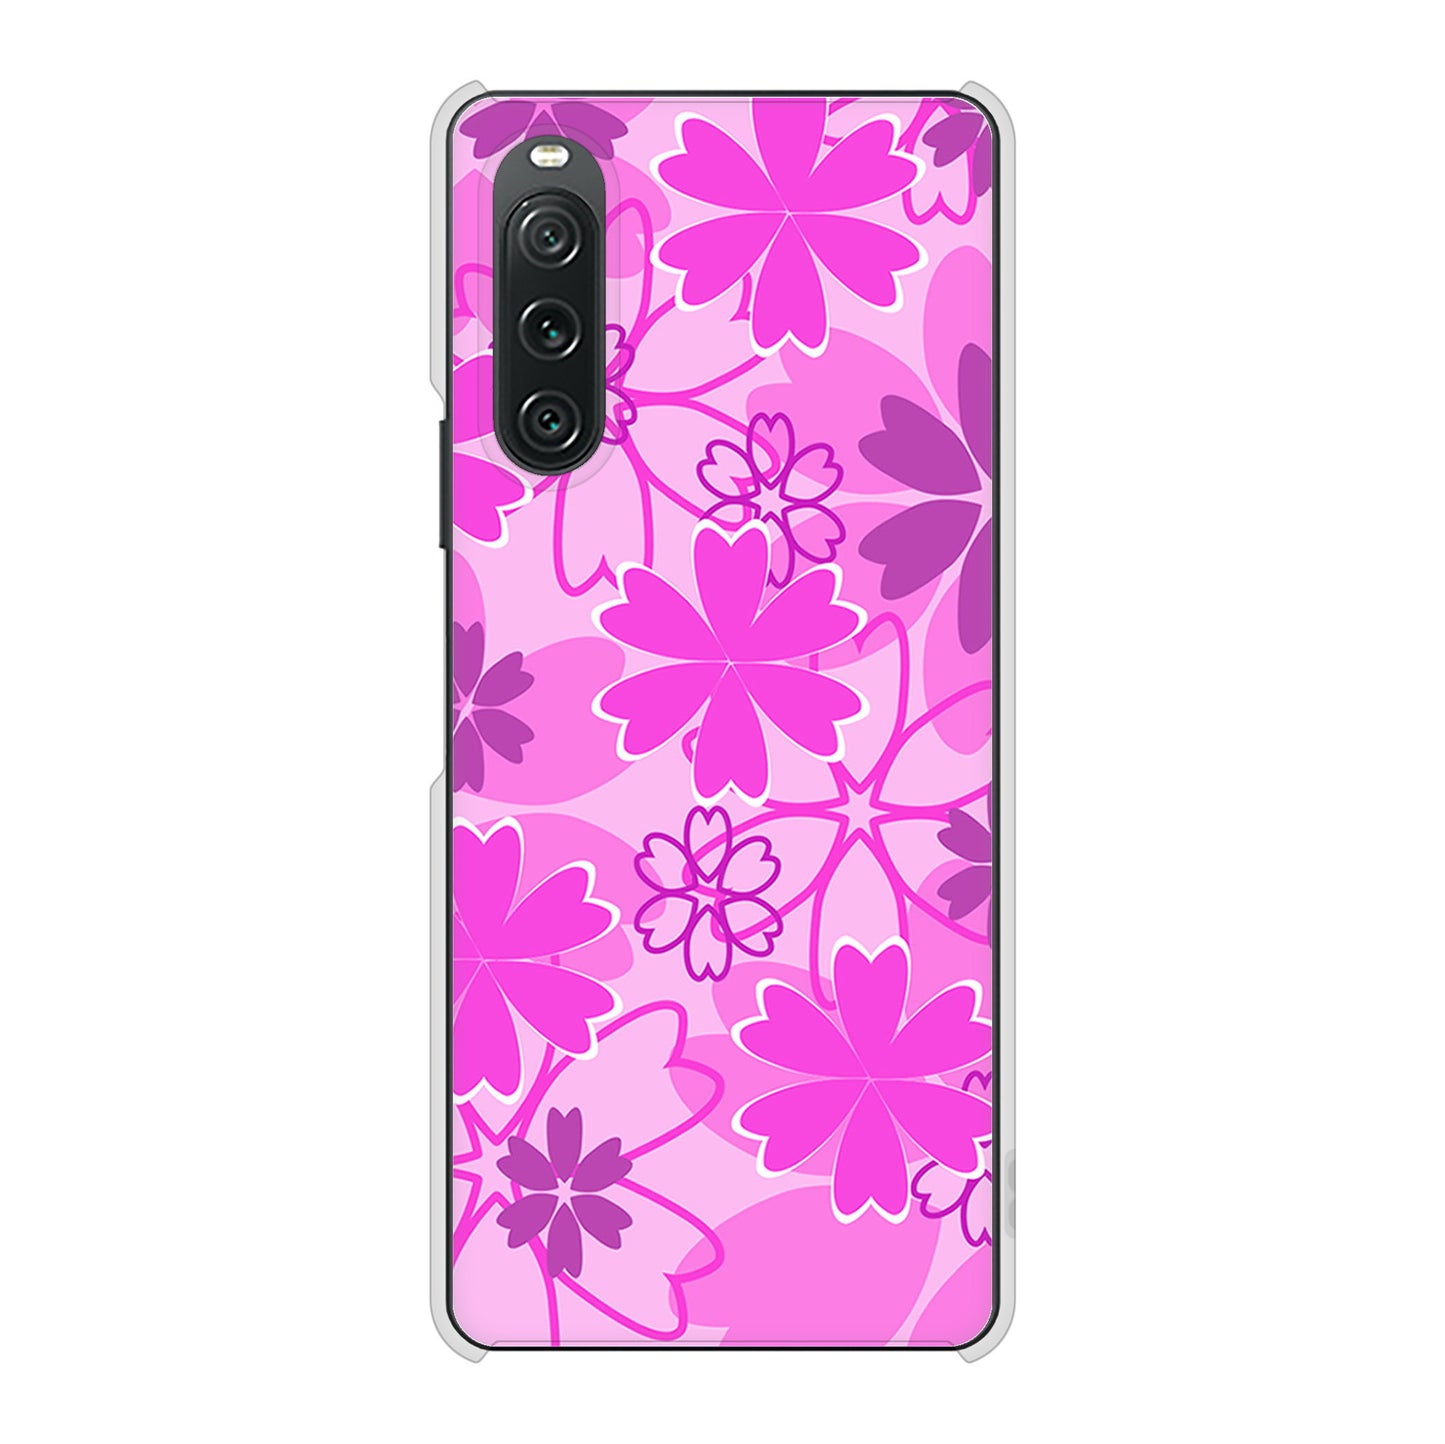 Xperia 10 V SO-52D docomo 高画質仕上げ 背面印刷 ハードケース重なり合う花